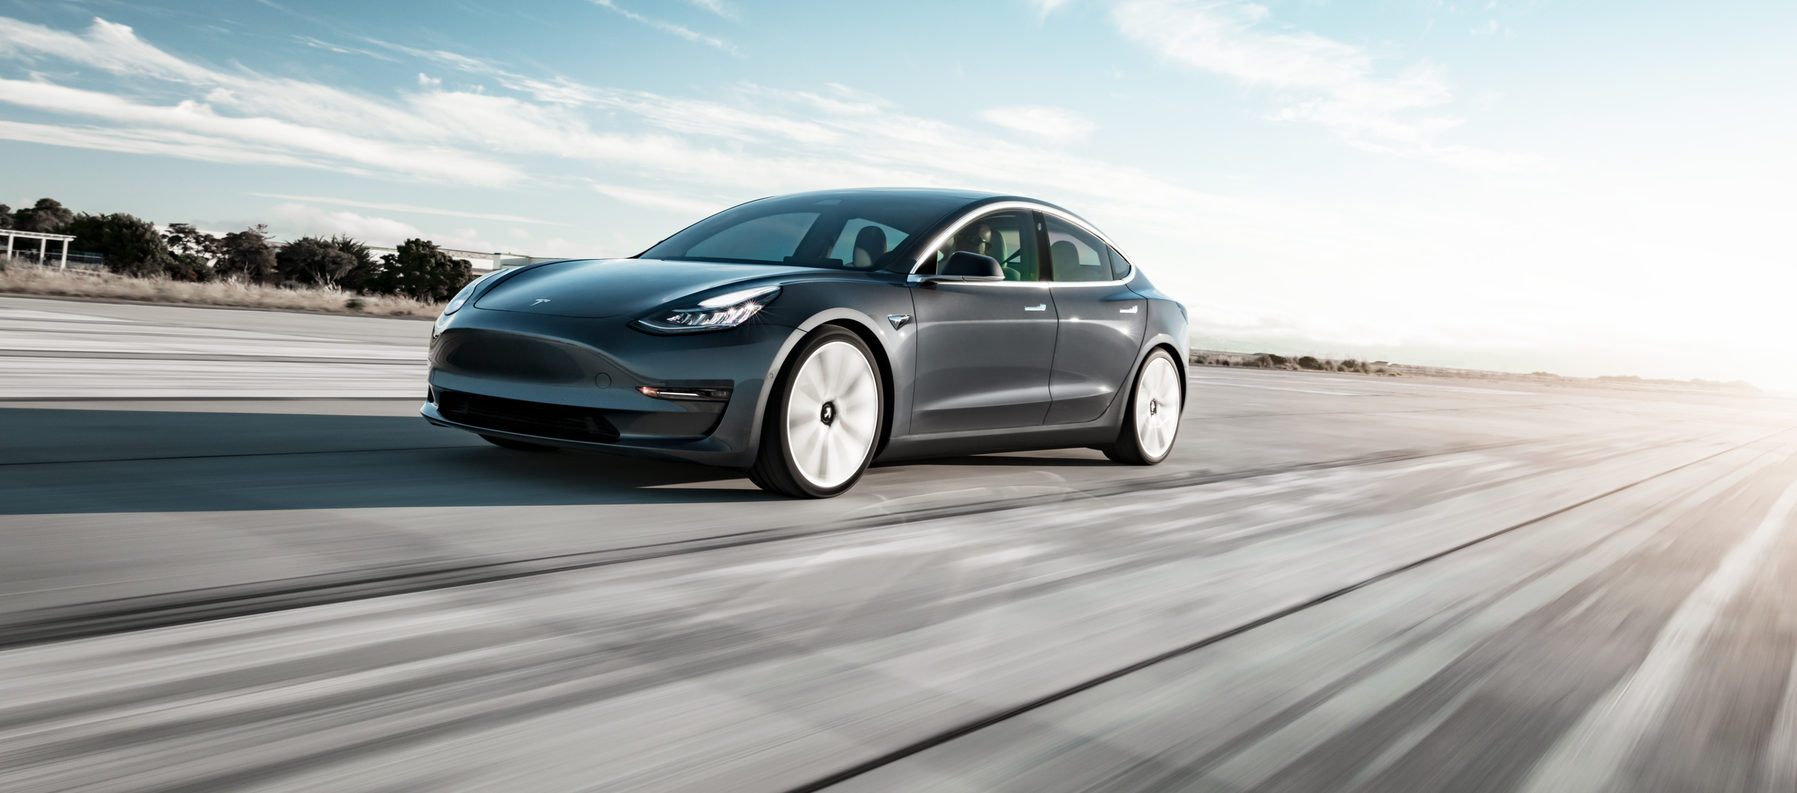 Tesla pushes Model 3 European ramp with test drive events in multiple countries